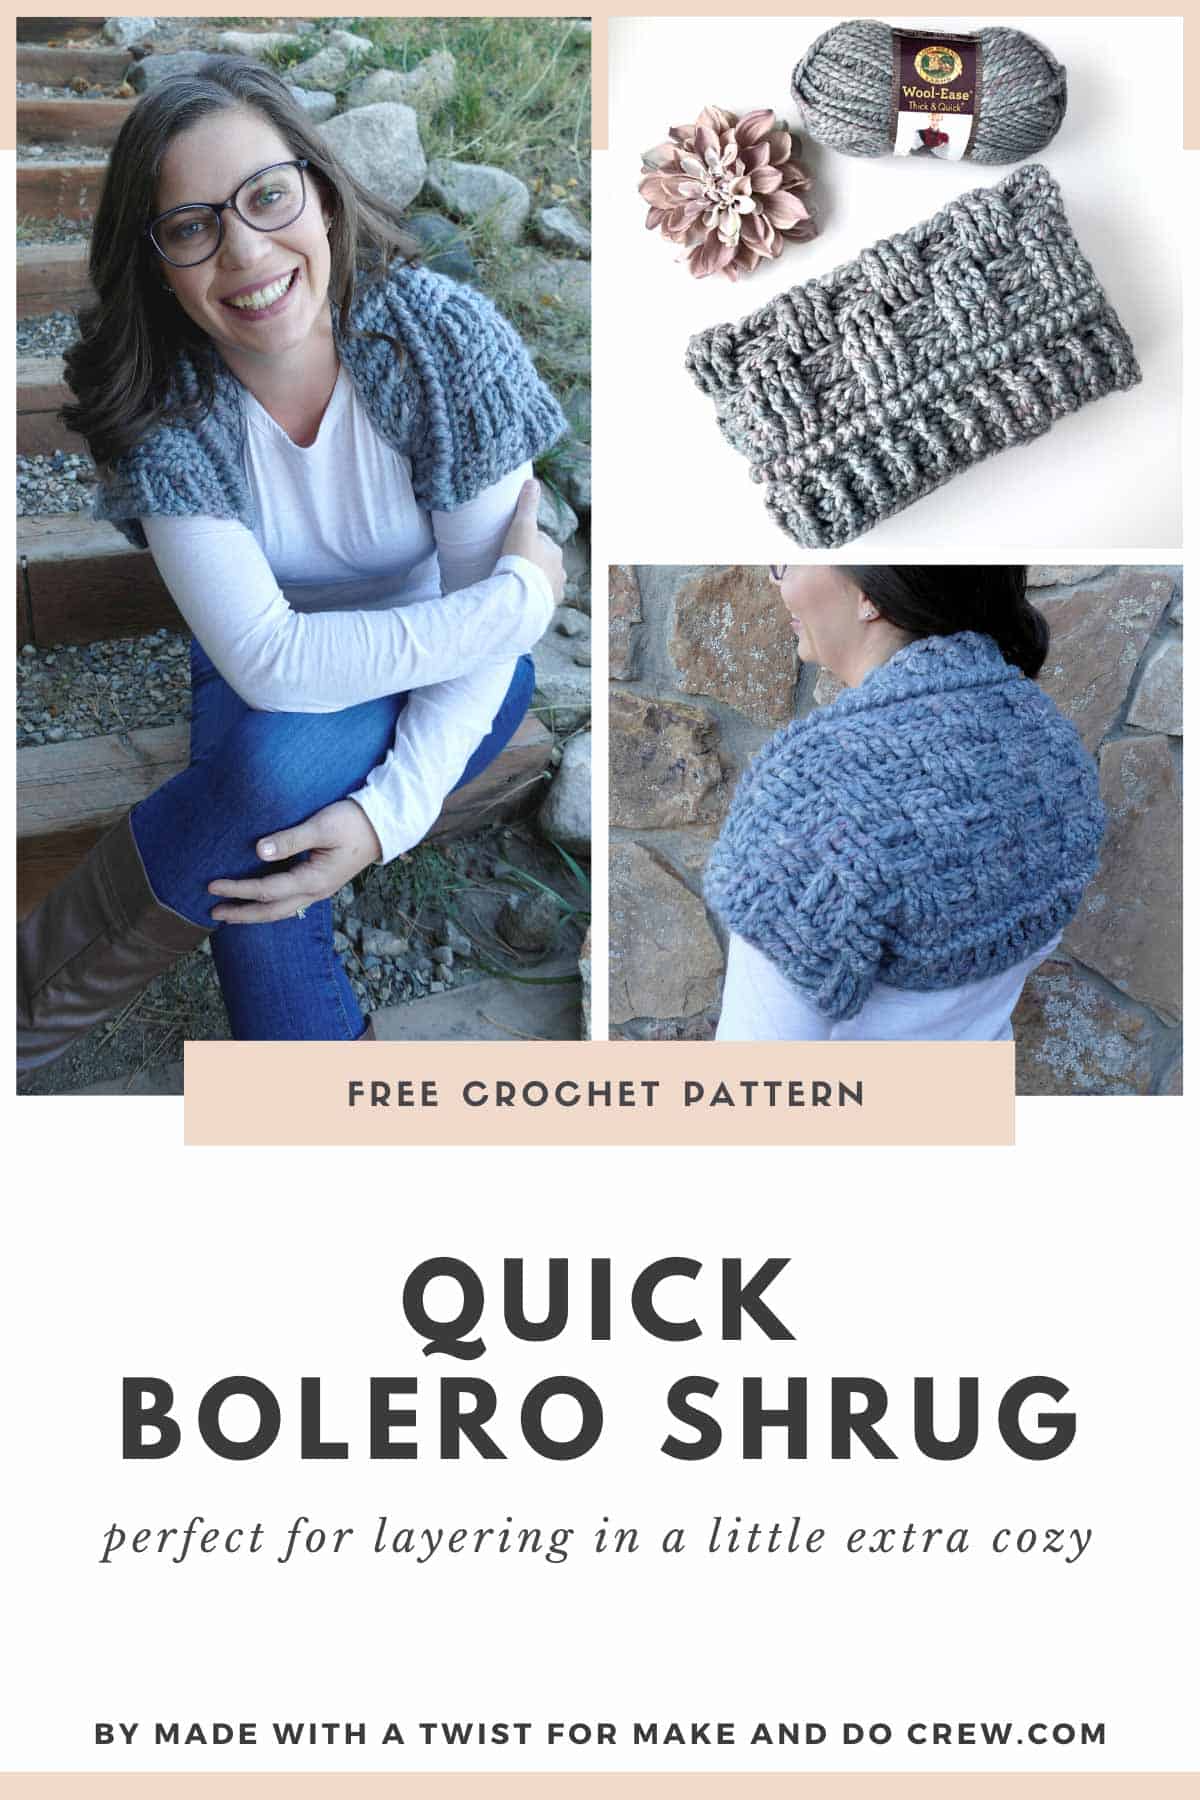 Grid of images showing a woman with dark hair. She is wearing a long-sleeved white shirt, blue jeans, and a gray, chunky crochet bolero shrug. Free crochet pattern.